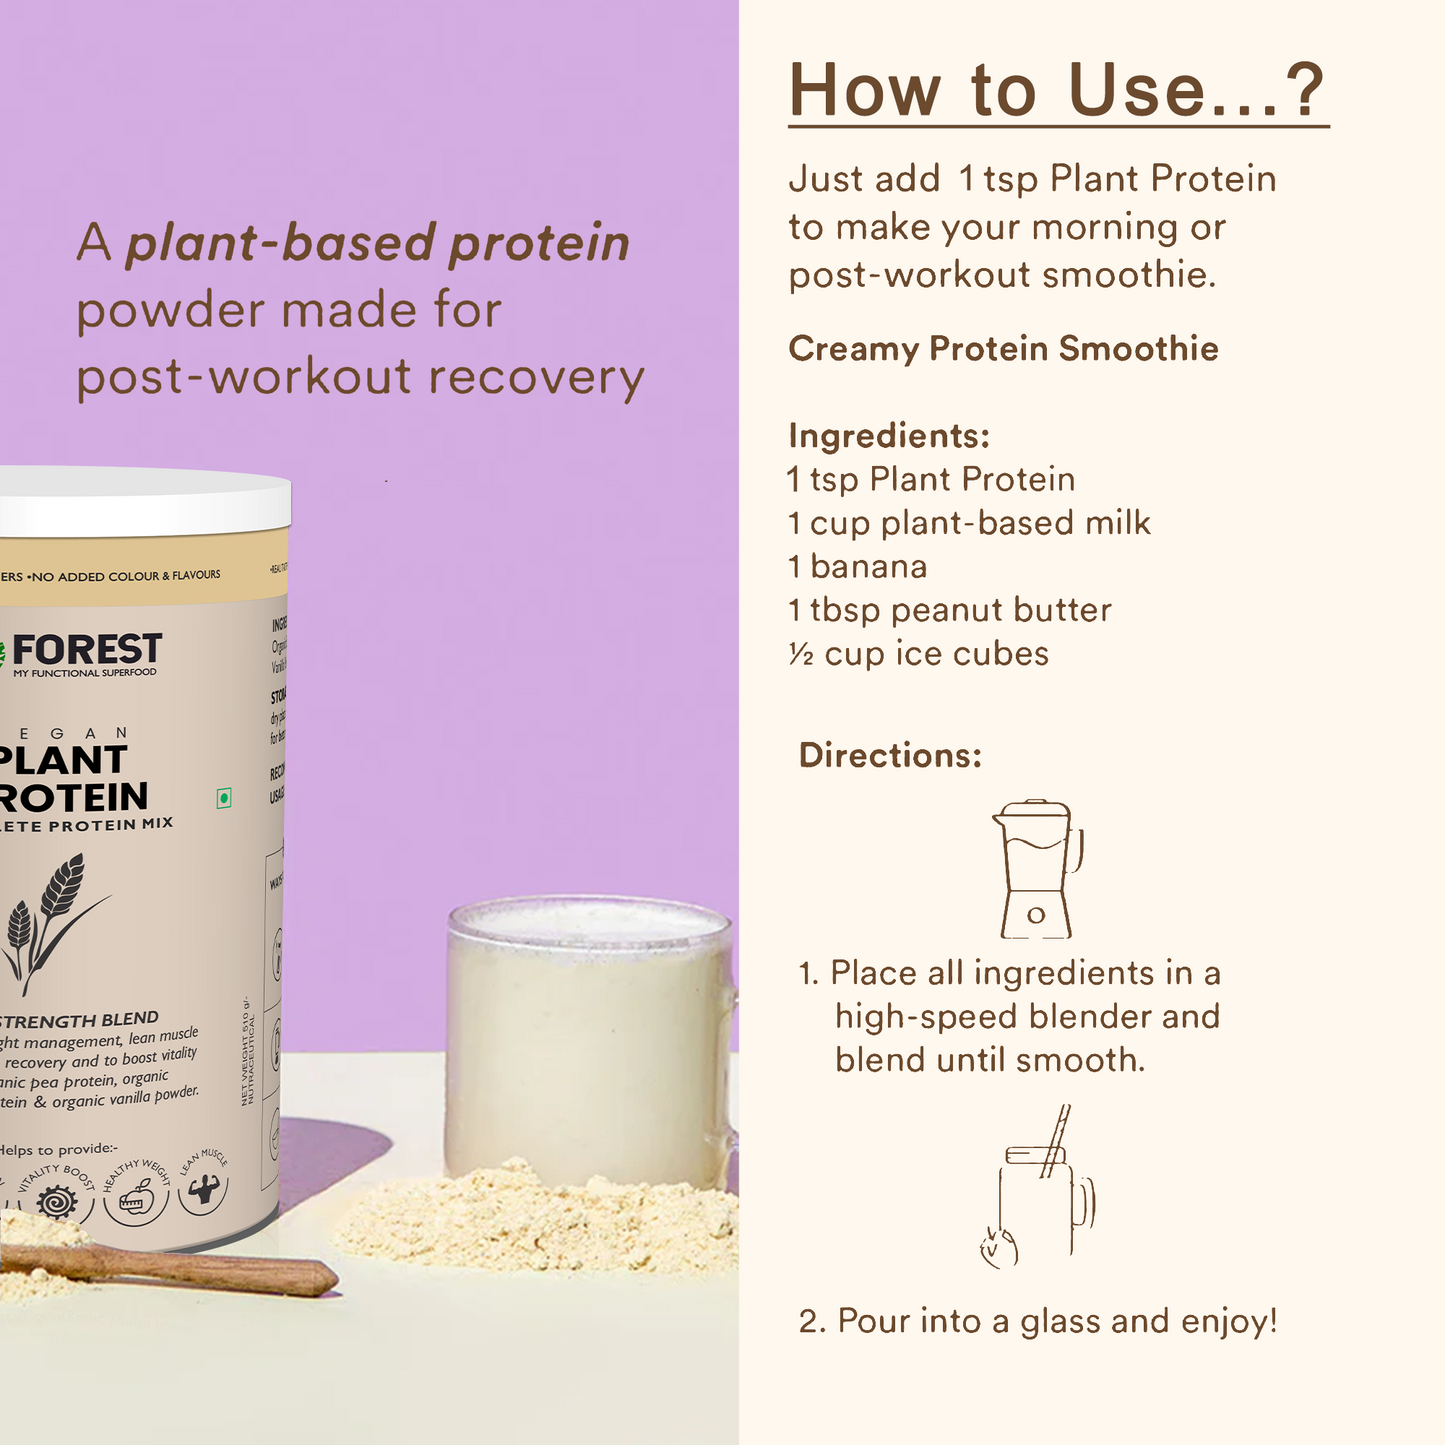 Organic Plant Protein - Plant Based Protein